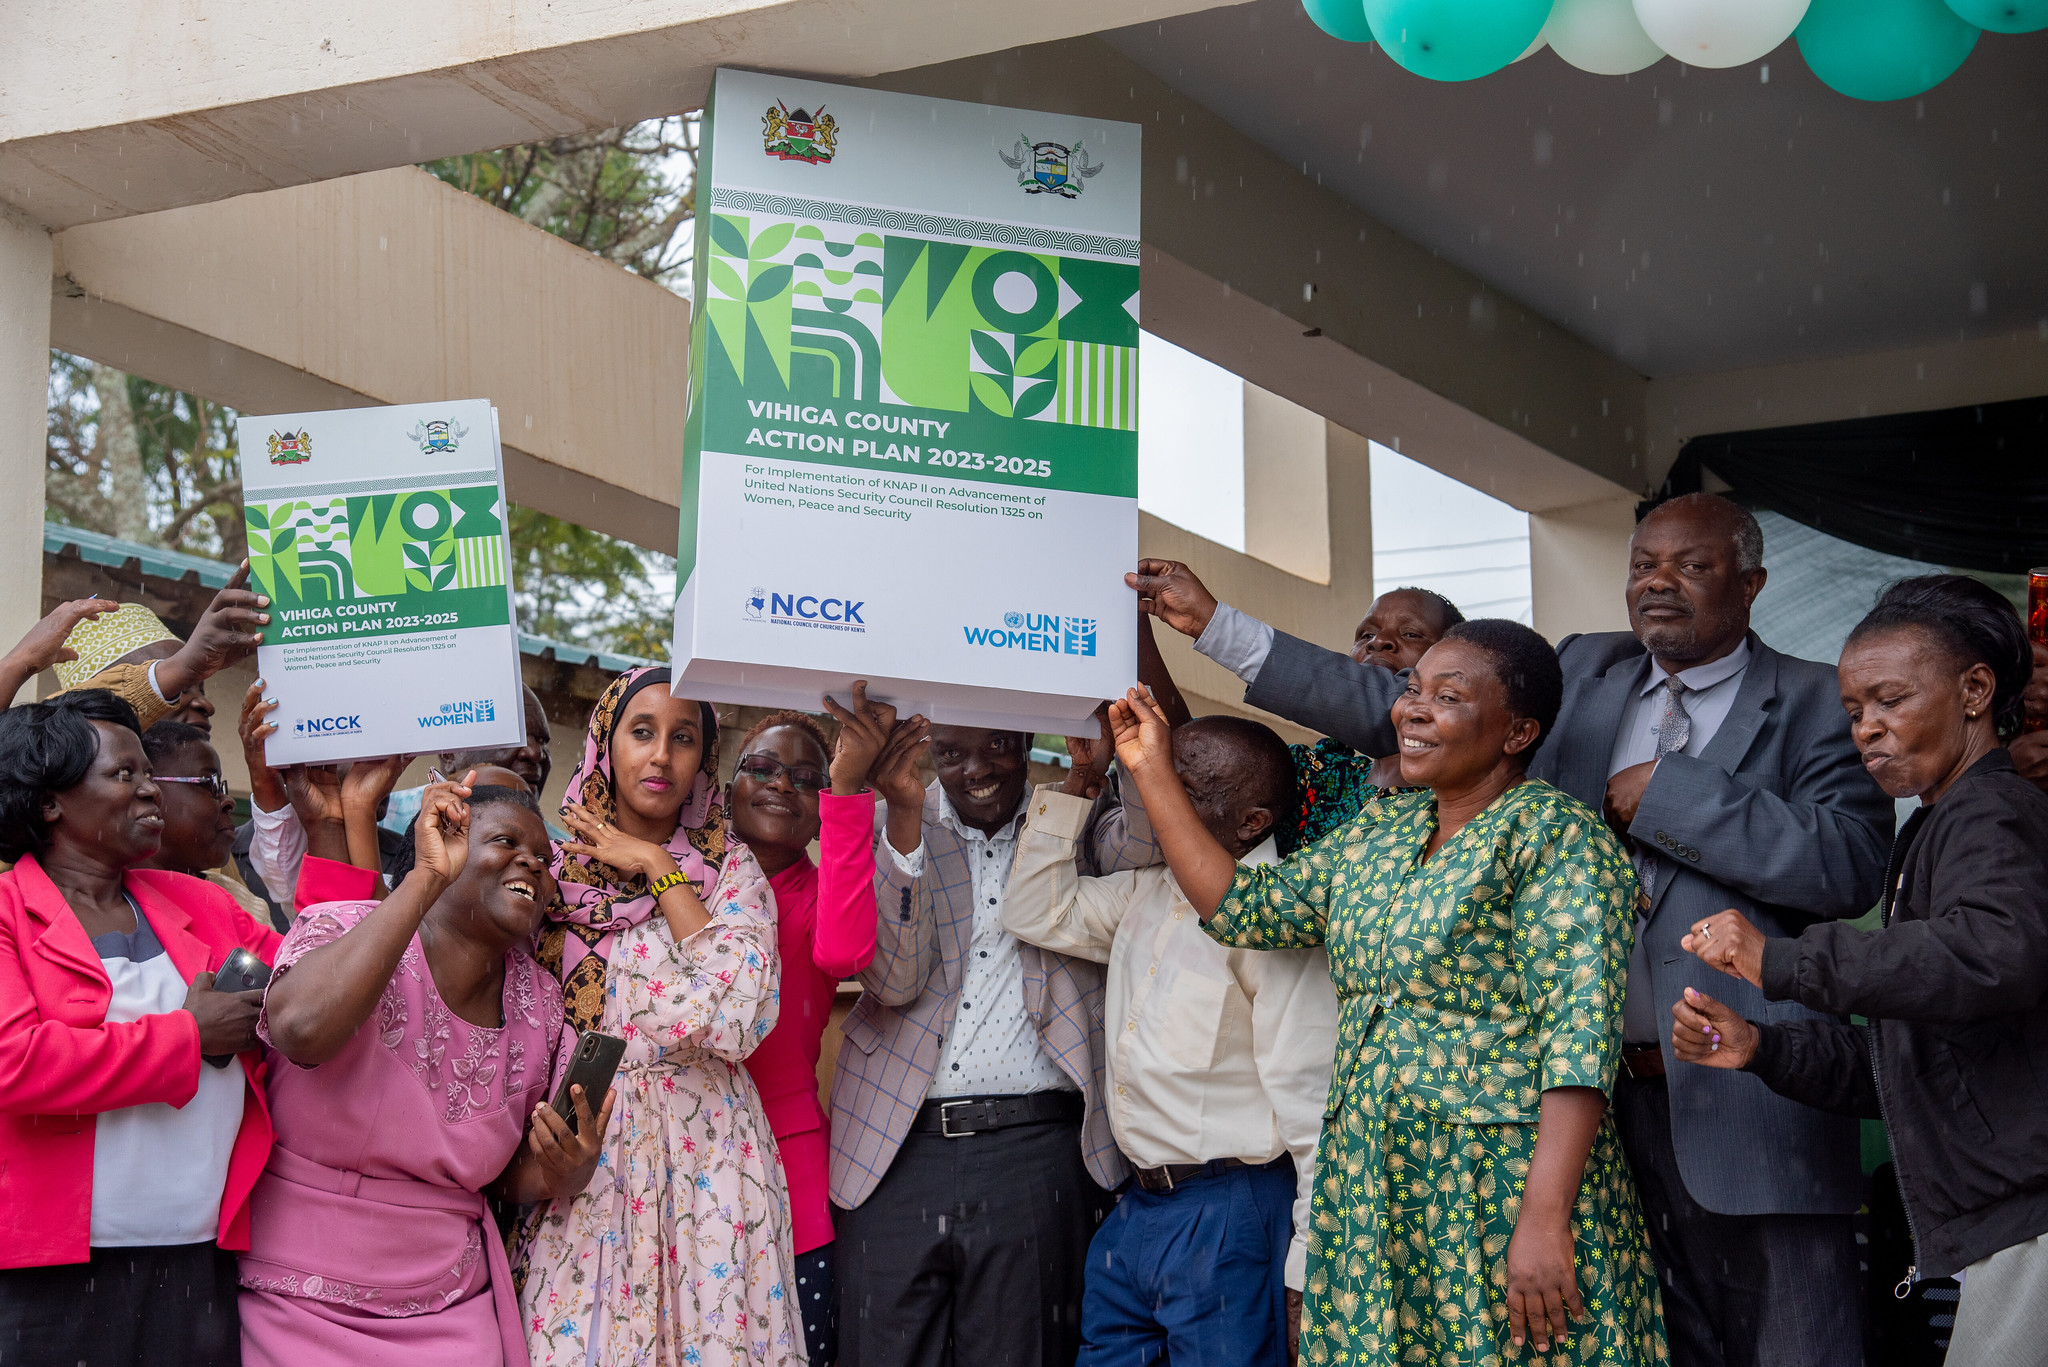 Vihiga County launched its Action Plan in December 2023 with partners, during the 16 Days of Activism against Gender-Based Violence. Photo credit. UN Women Kenya/Purity Kiarie  